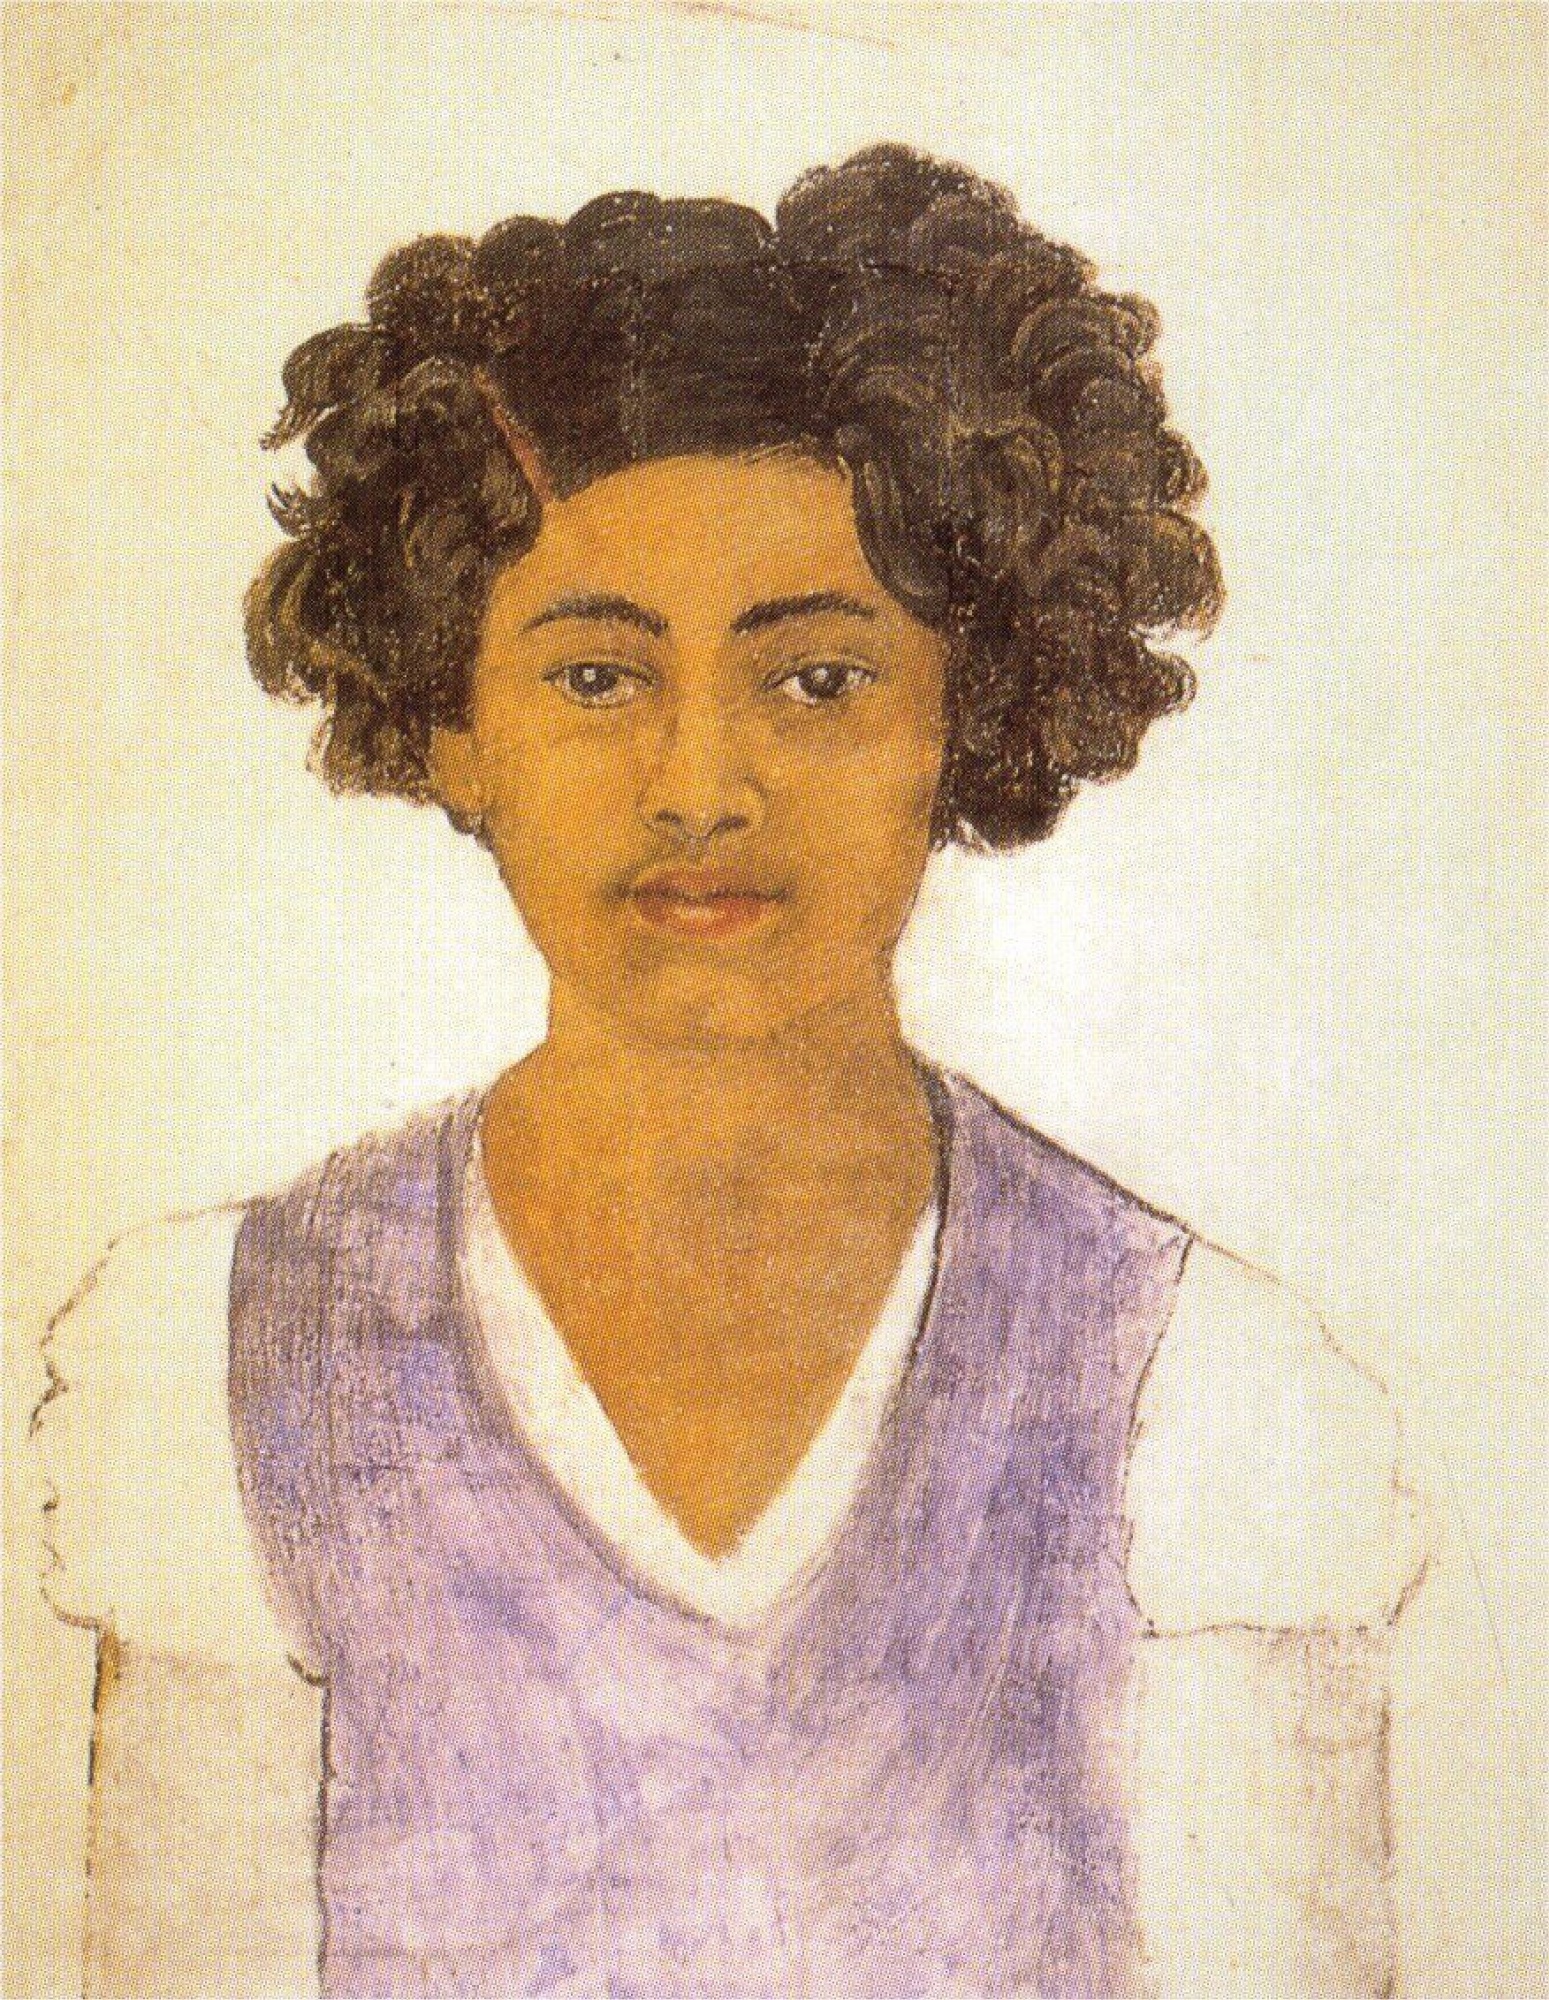 Self-portrait, 1922 by Frida Kahlo: History, Analysis & Facts | Arthive